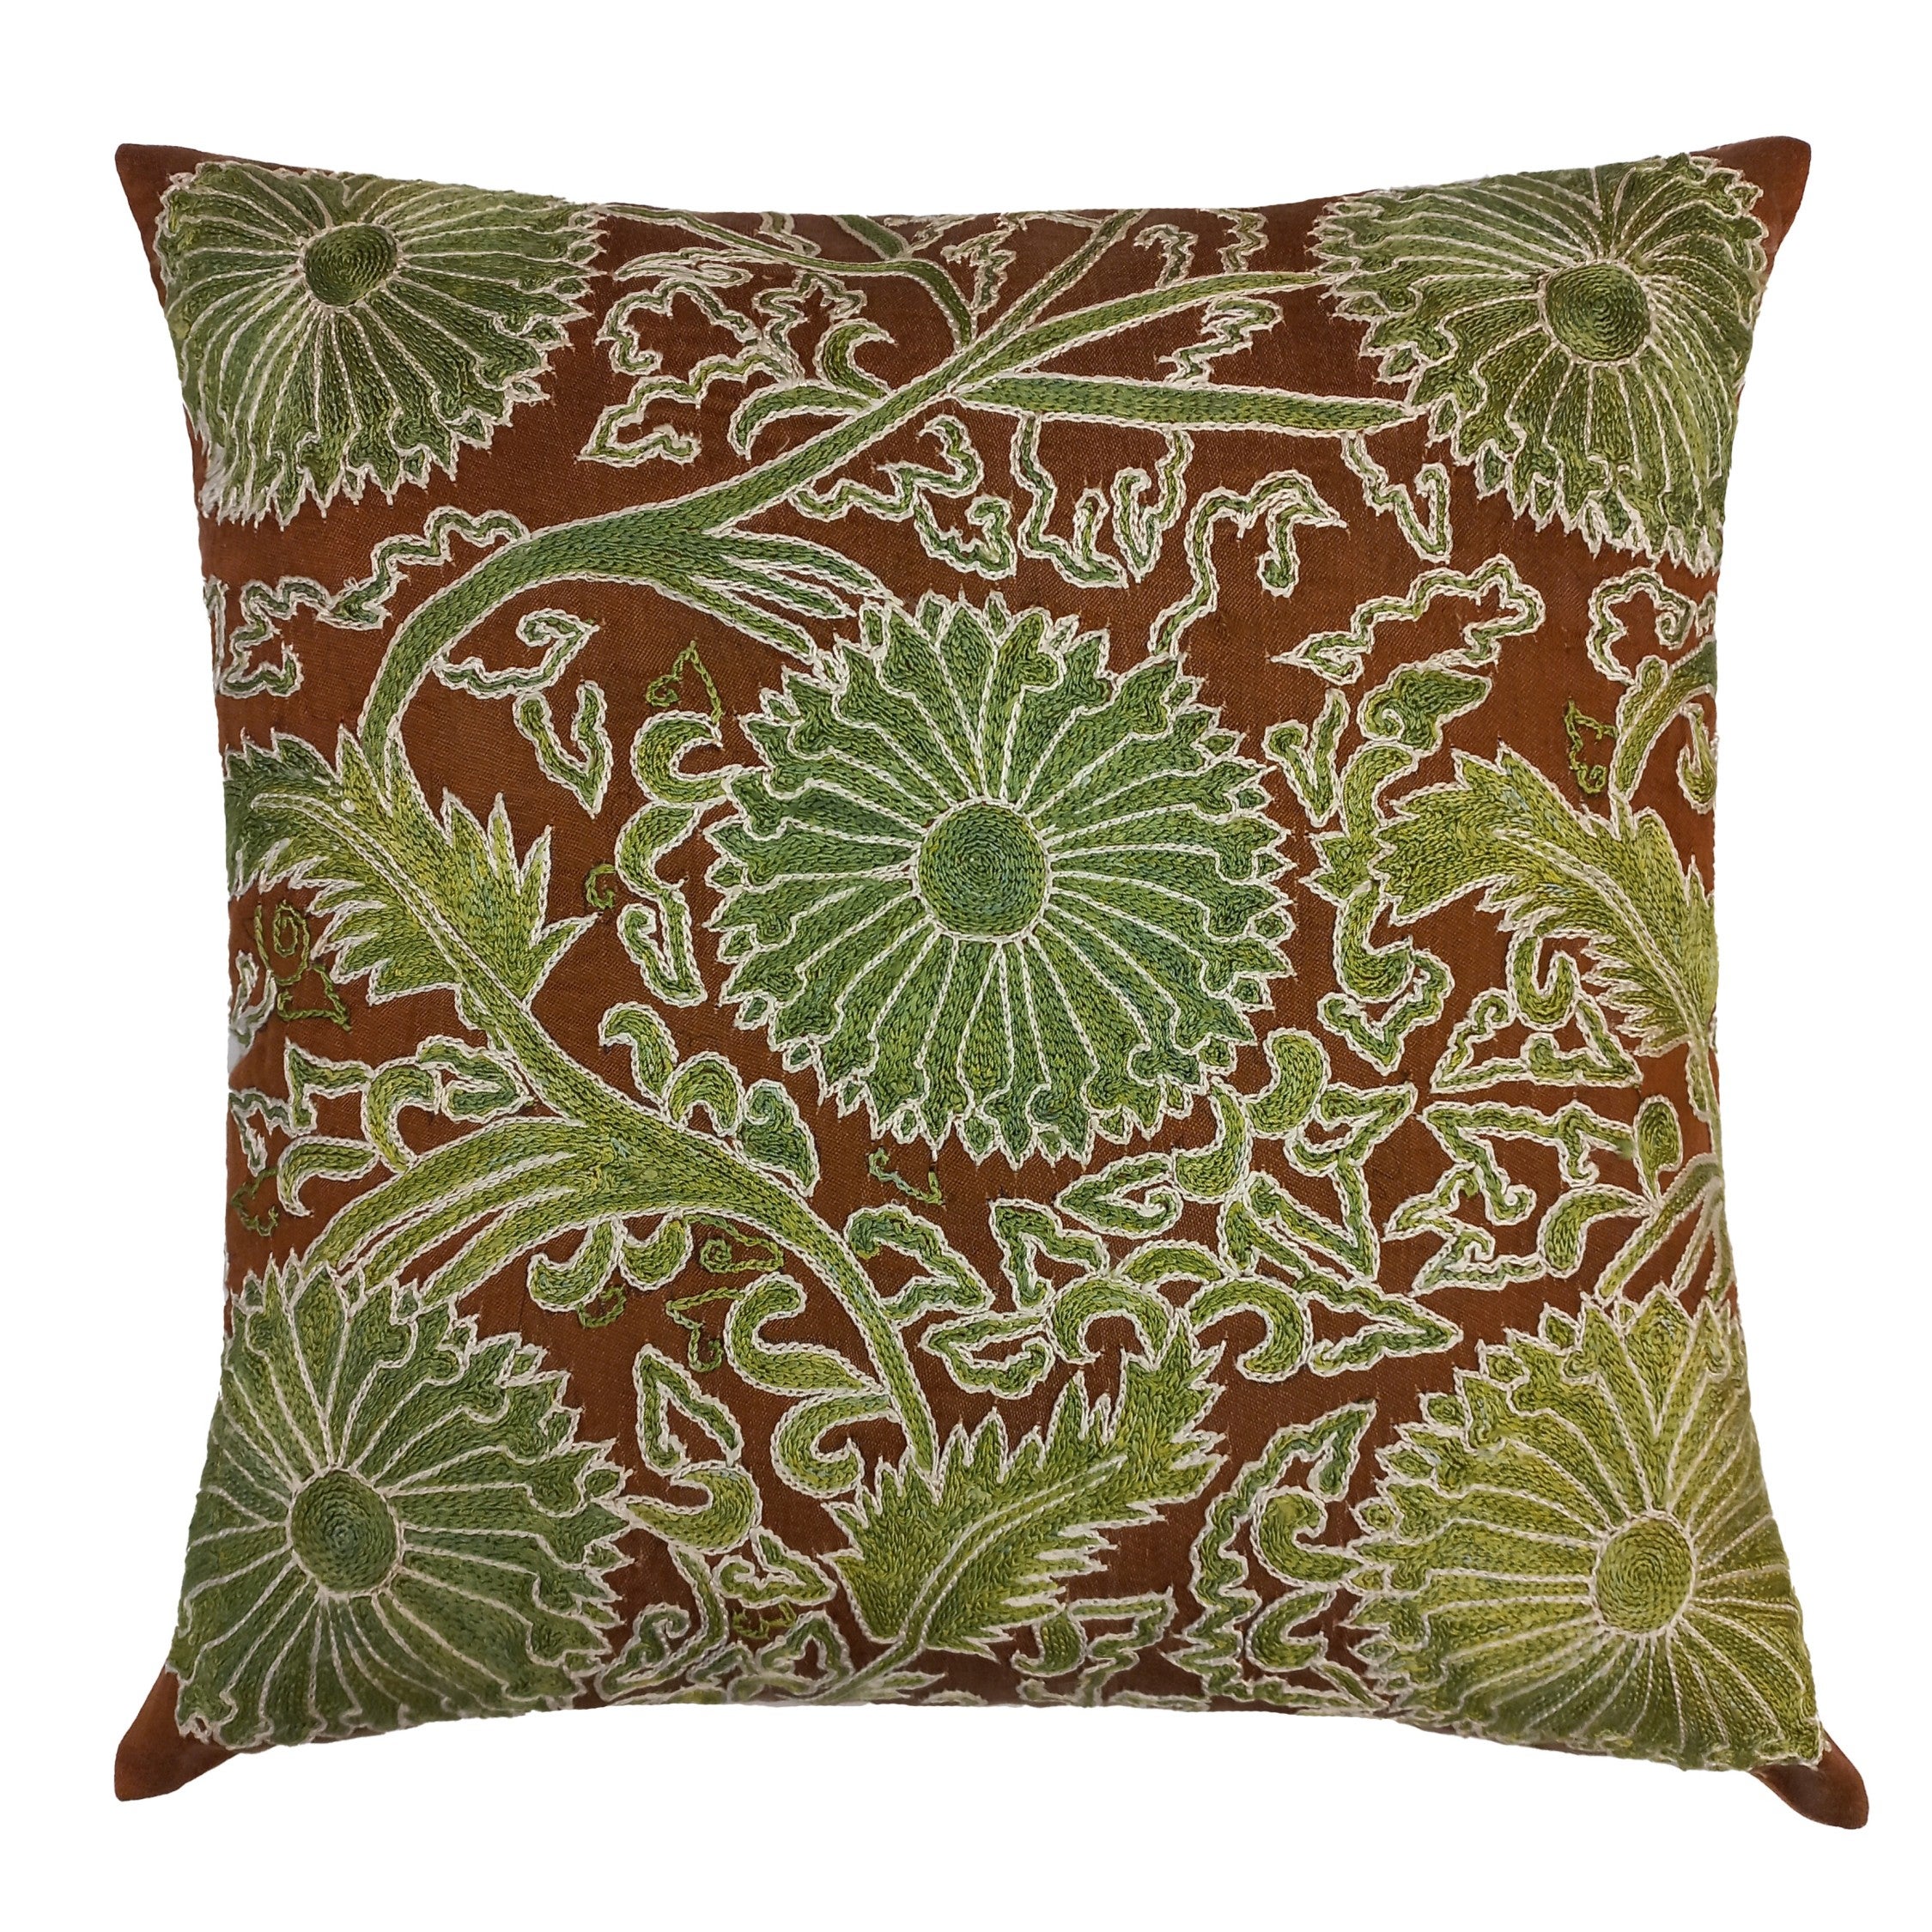 19"x19" Brown & Green Cushion Cover Made of 100% Silk, Embroidered Throw Pillow